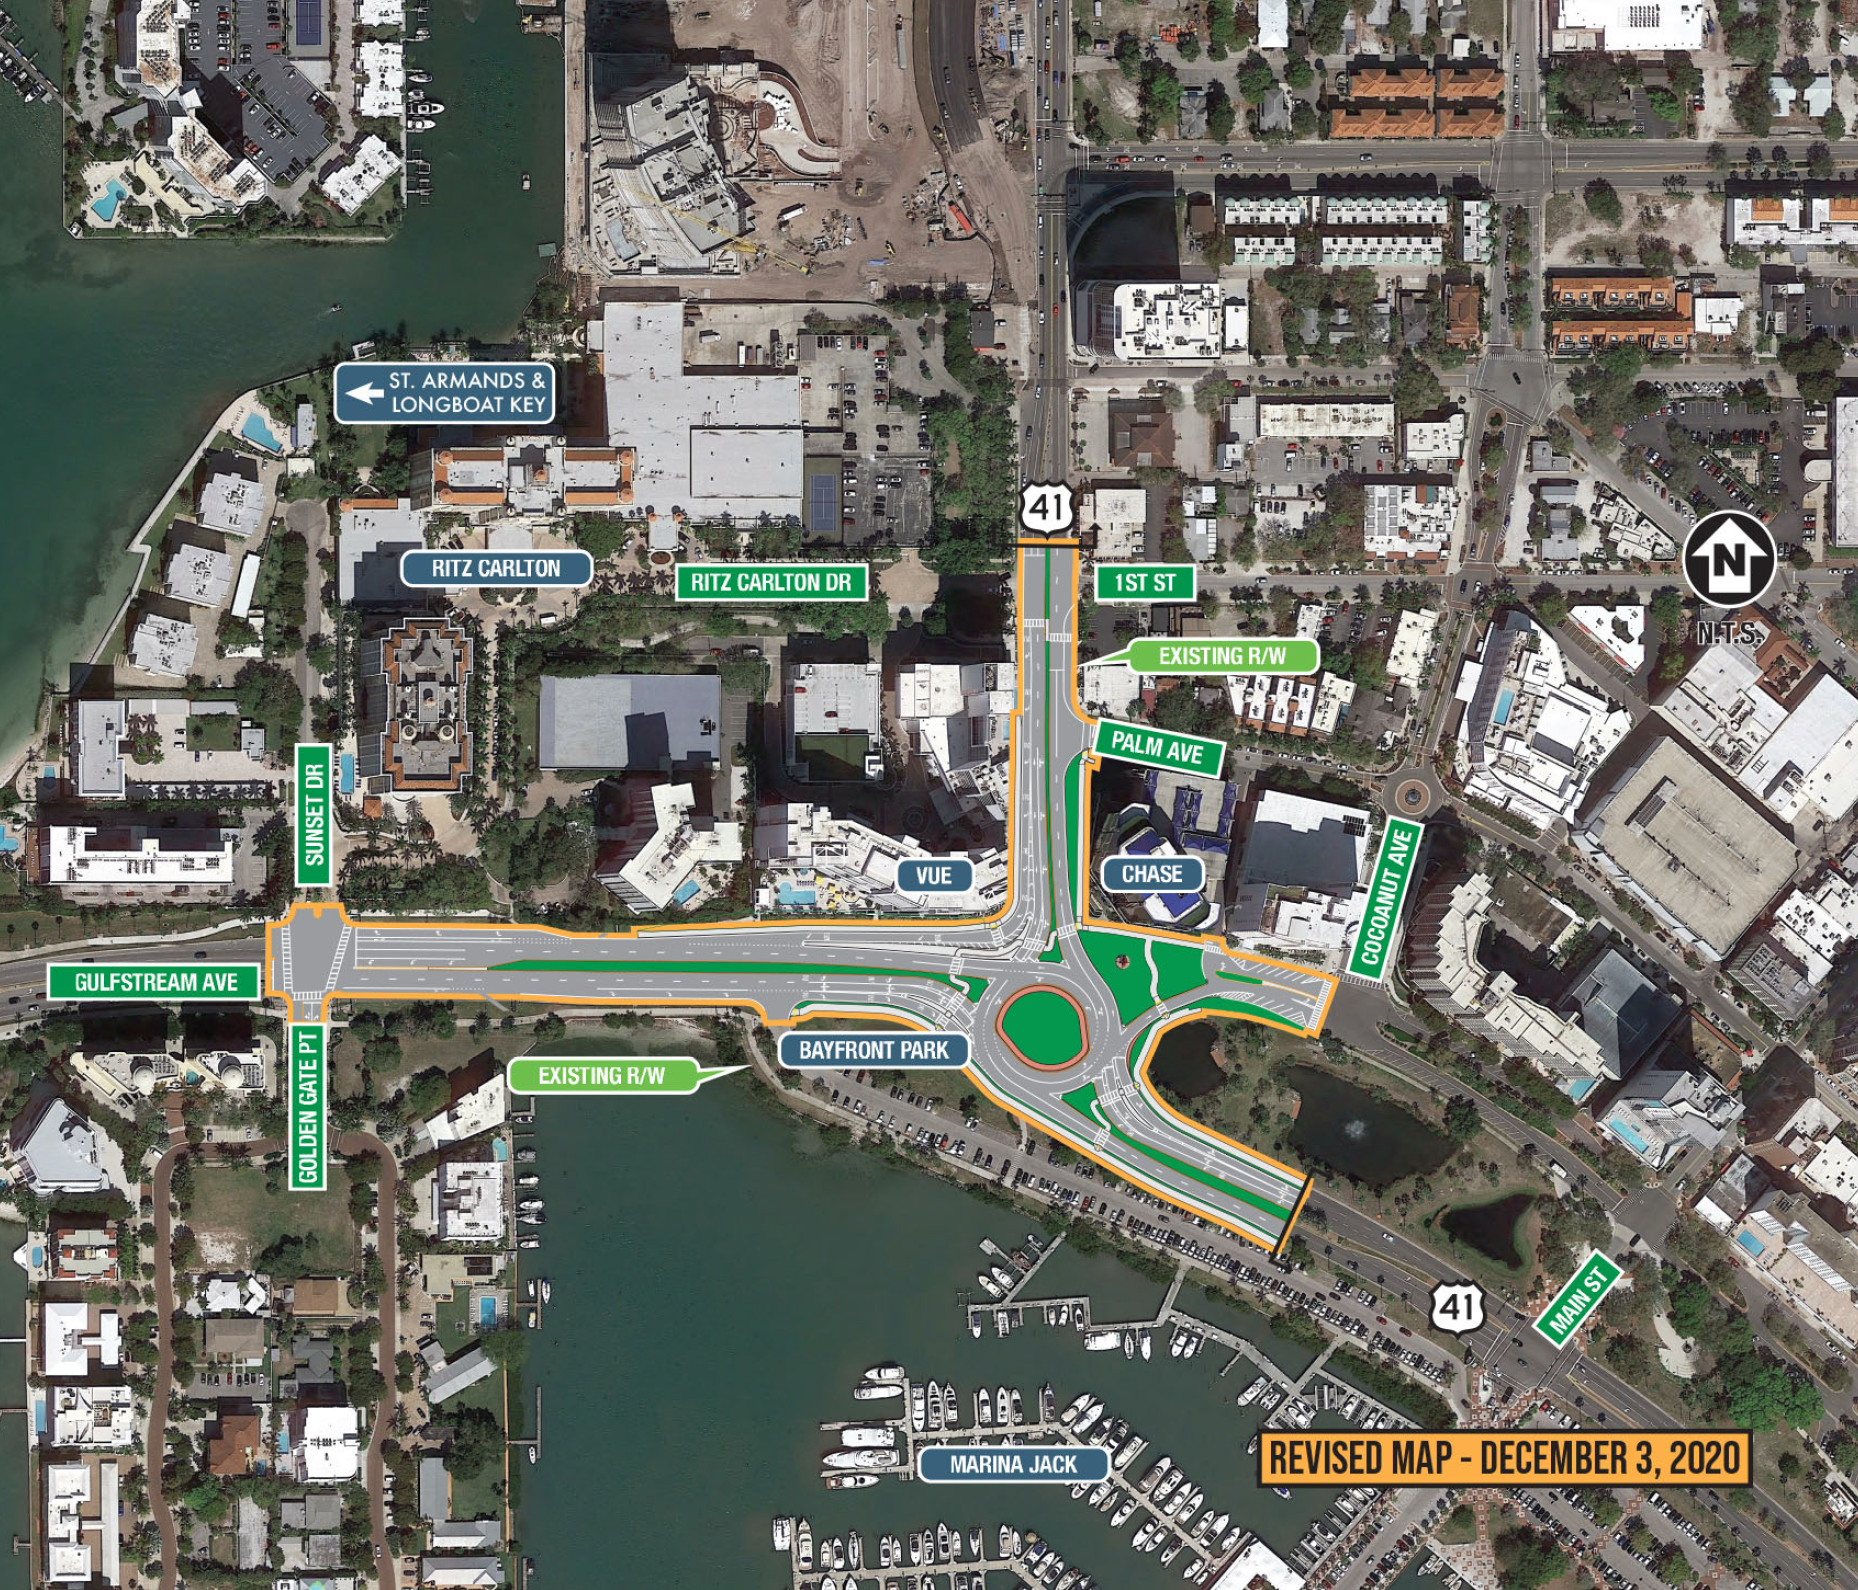 FDOT provided this map of how the roundabout will work at U.S. 41 and Gulfstream Avenue. Construction is scheduled to start in February 2021.